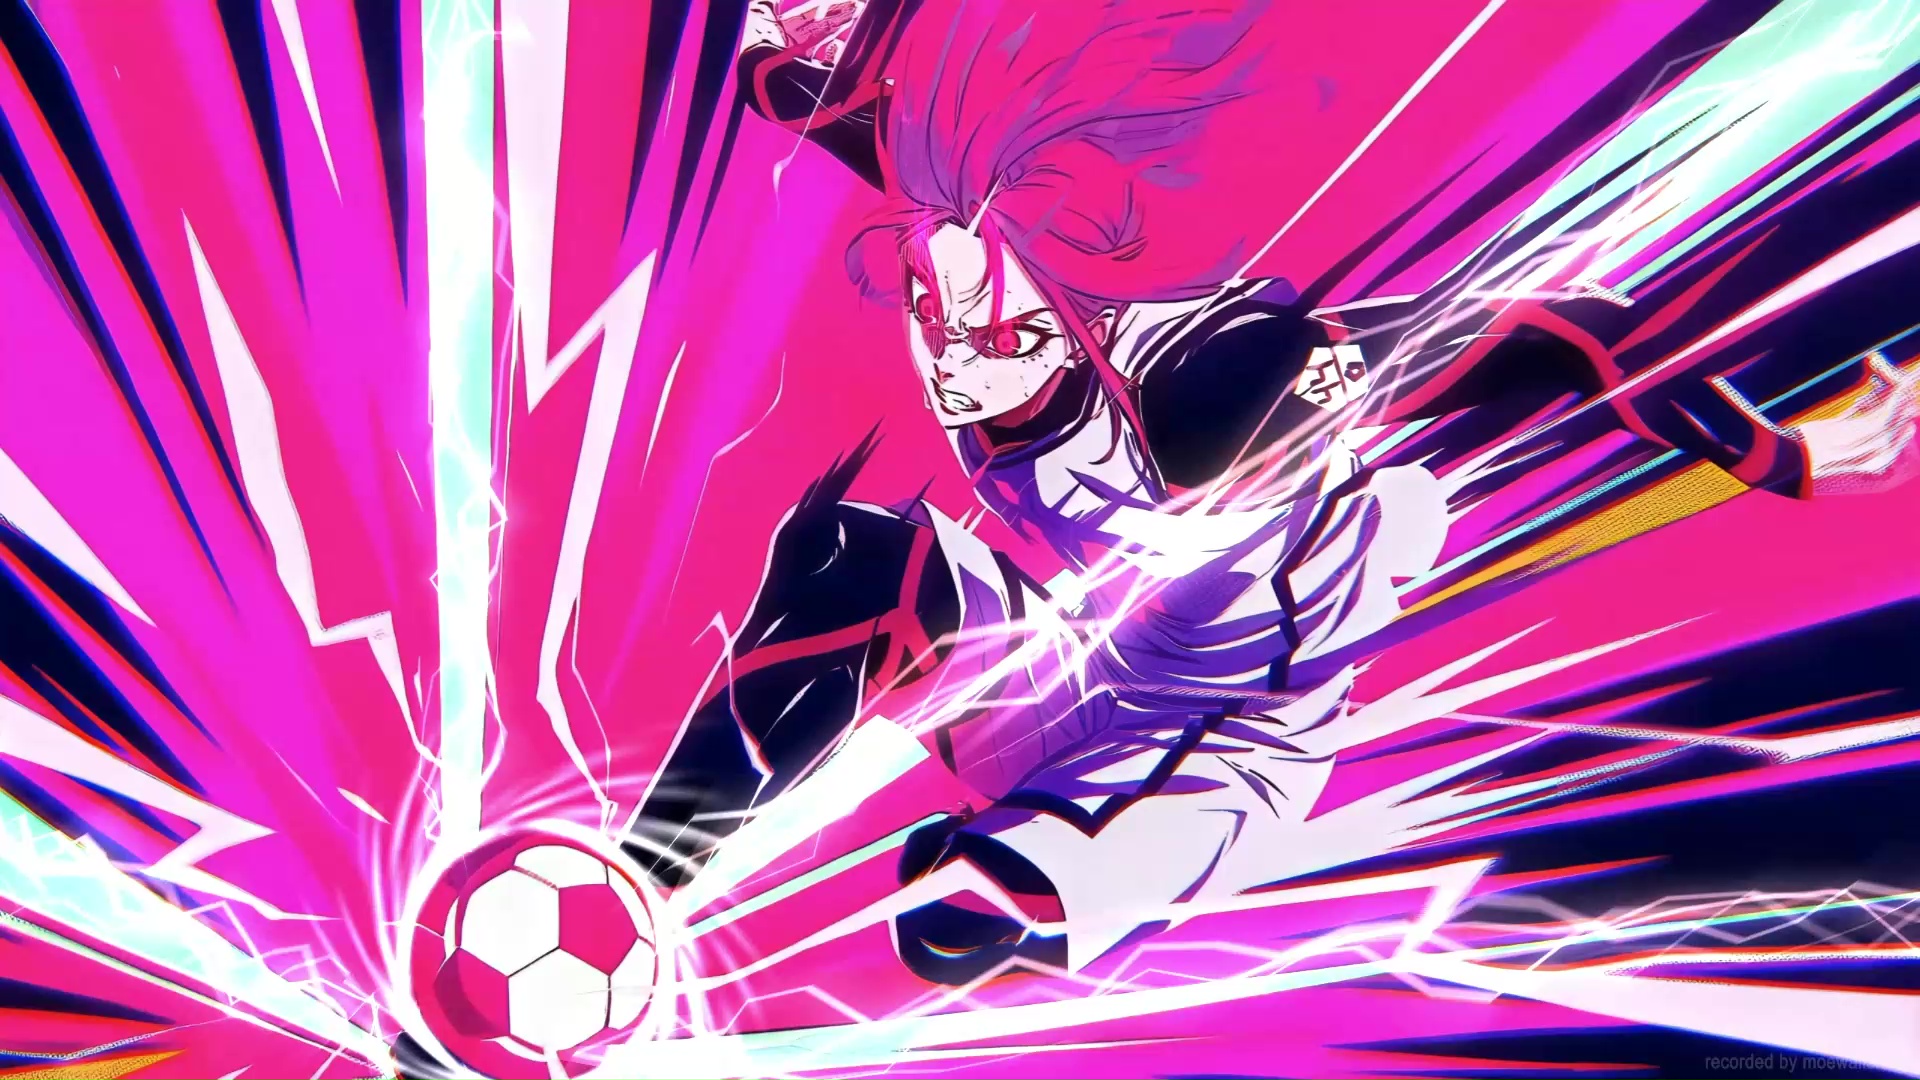 12 Football Live Wallpapers, Animated Wallpapers - MoeWalls